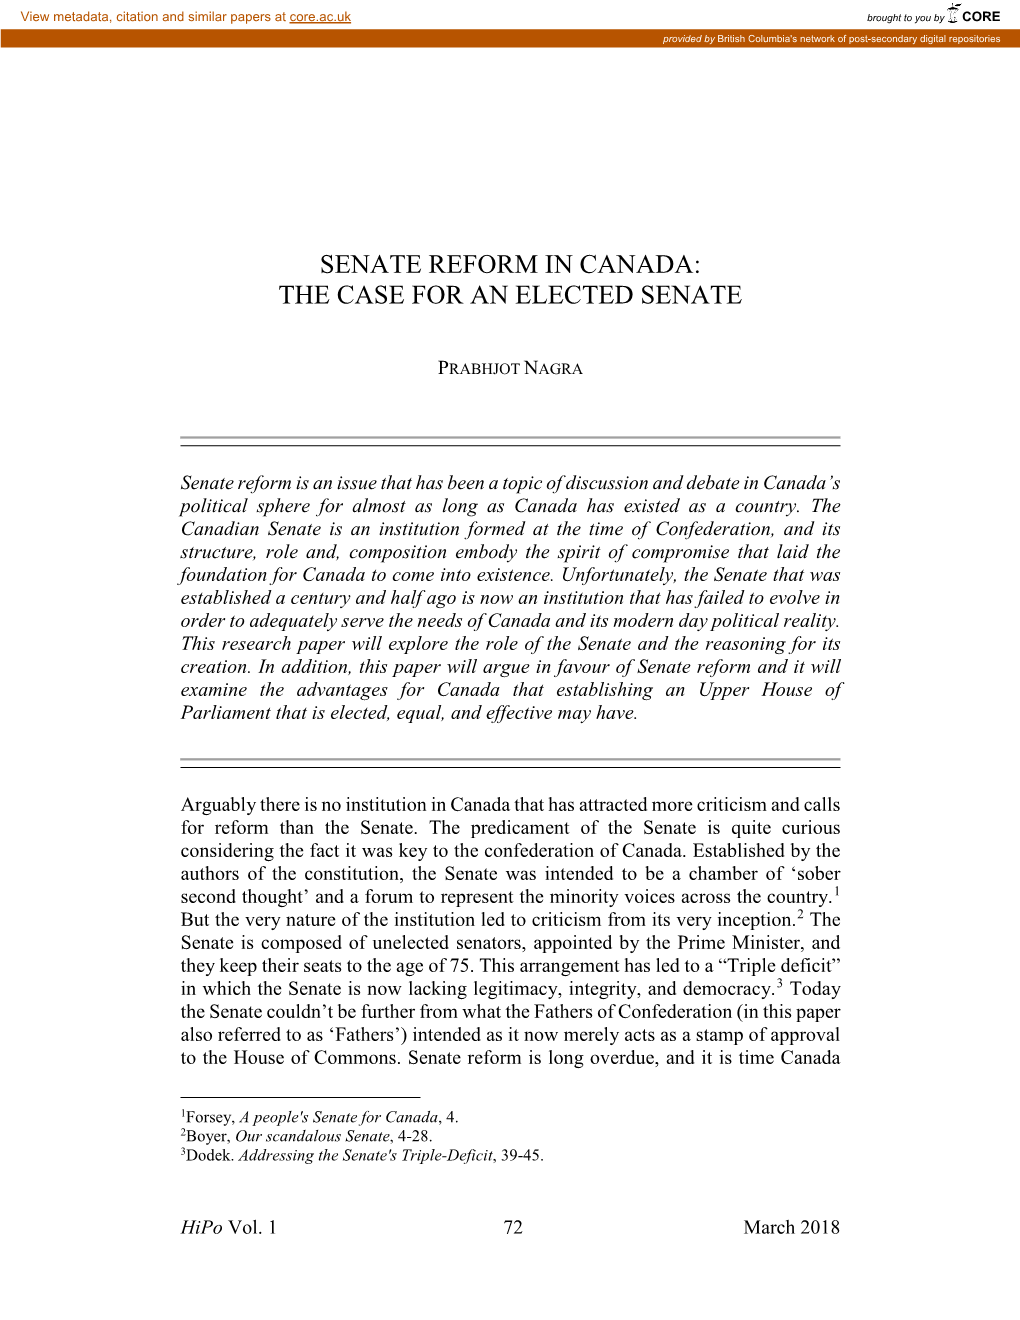 Senate Reform in Canada: the Case for an Elected Senate